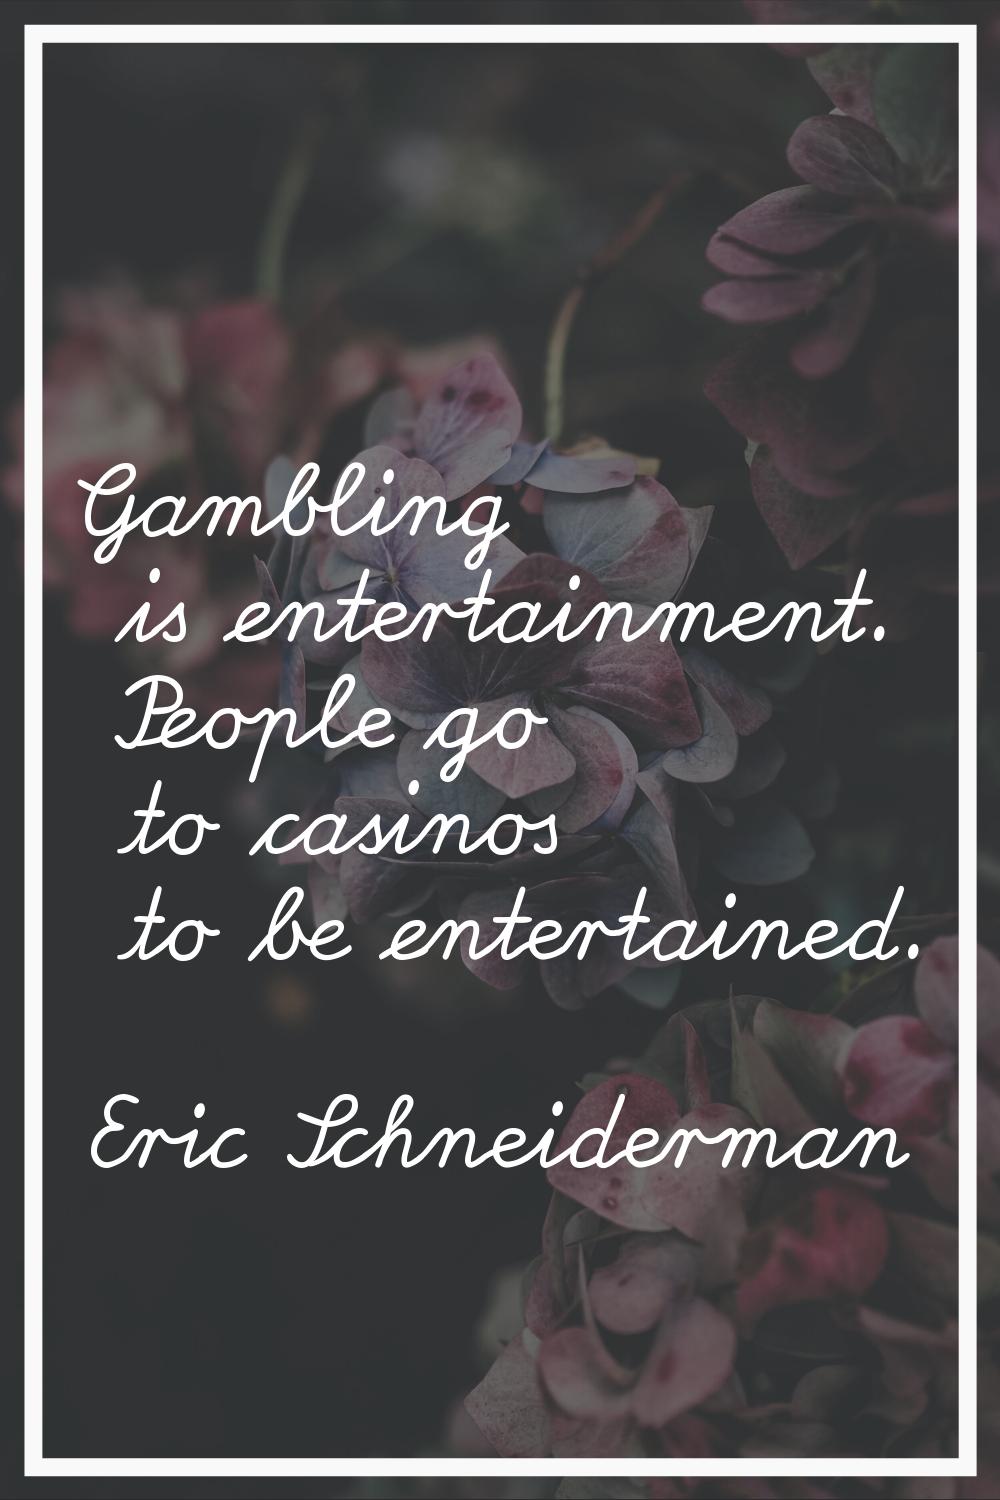 Gambling is entertainment. People go to casinos to be entertained.